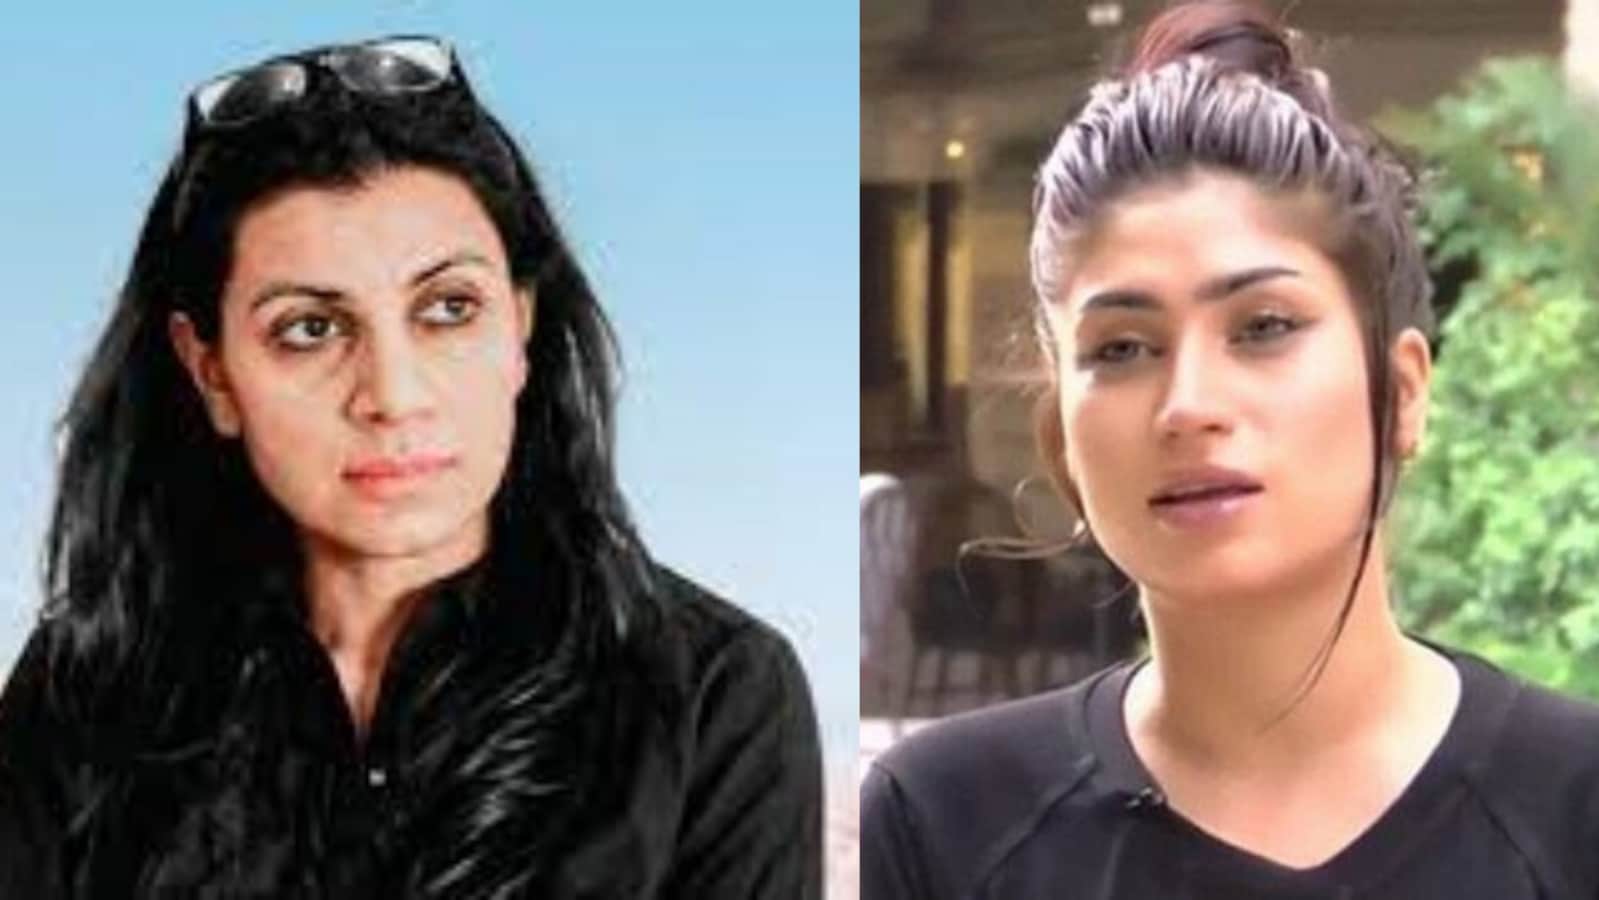 Alankrita Shrivastava to direct film on late Pakistani model Qandeel Baloch, who was murdered by her brother in 2016